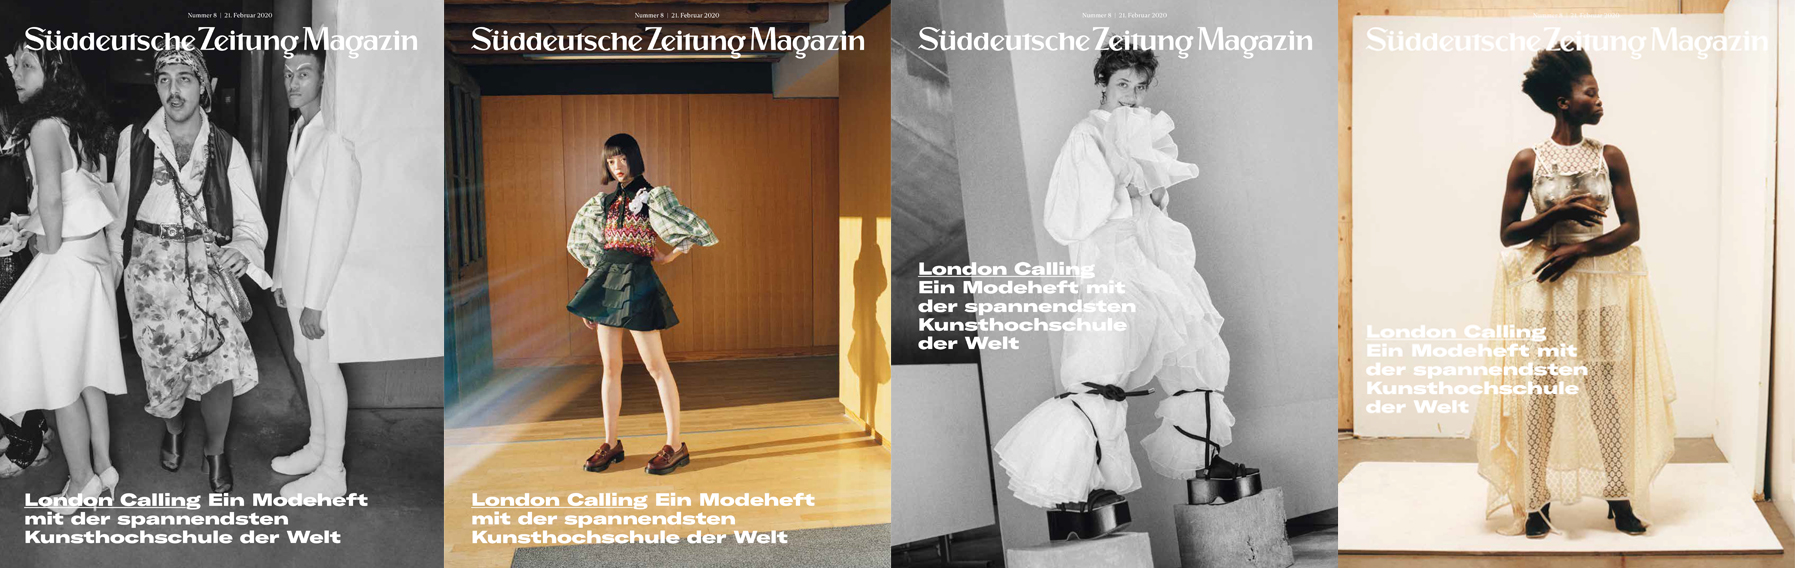 Four covers of SZ magazine showing four different portraits